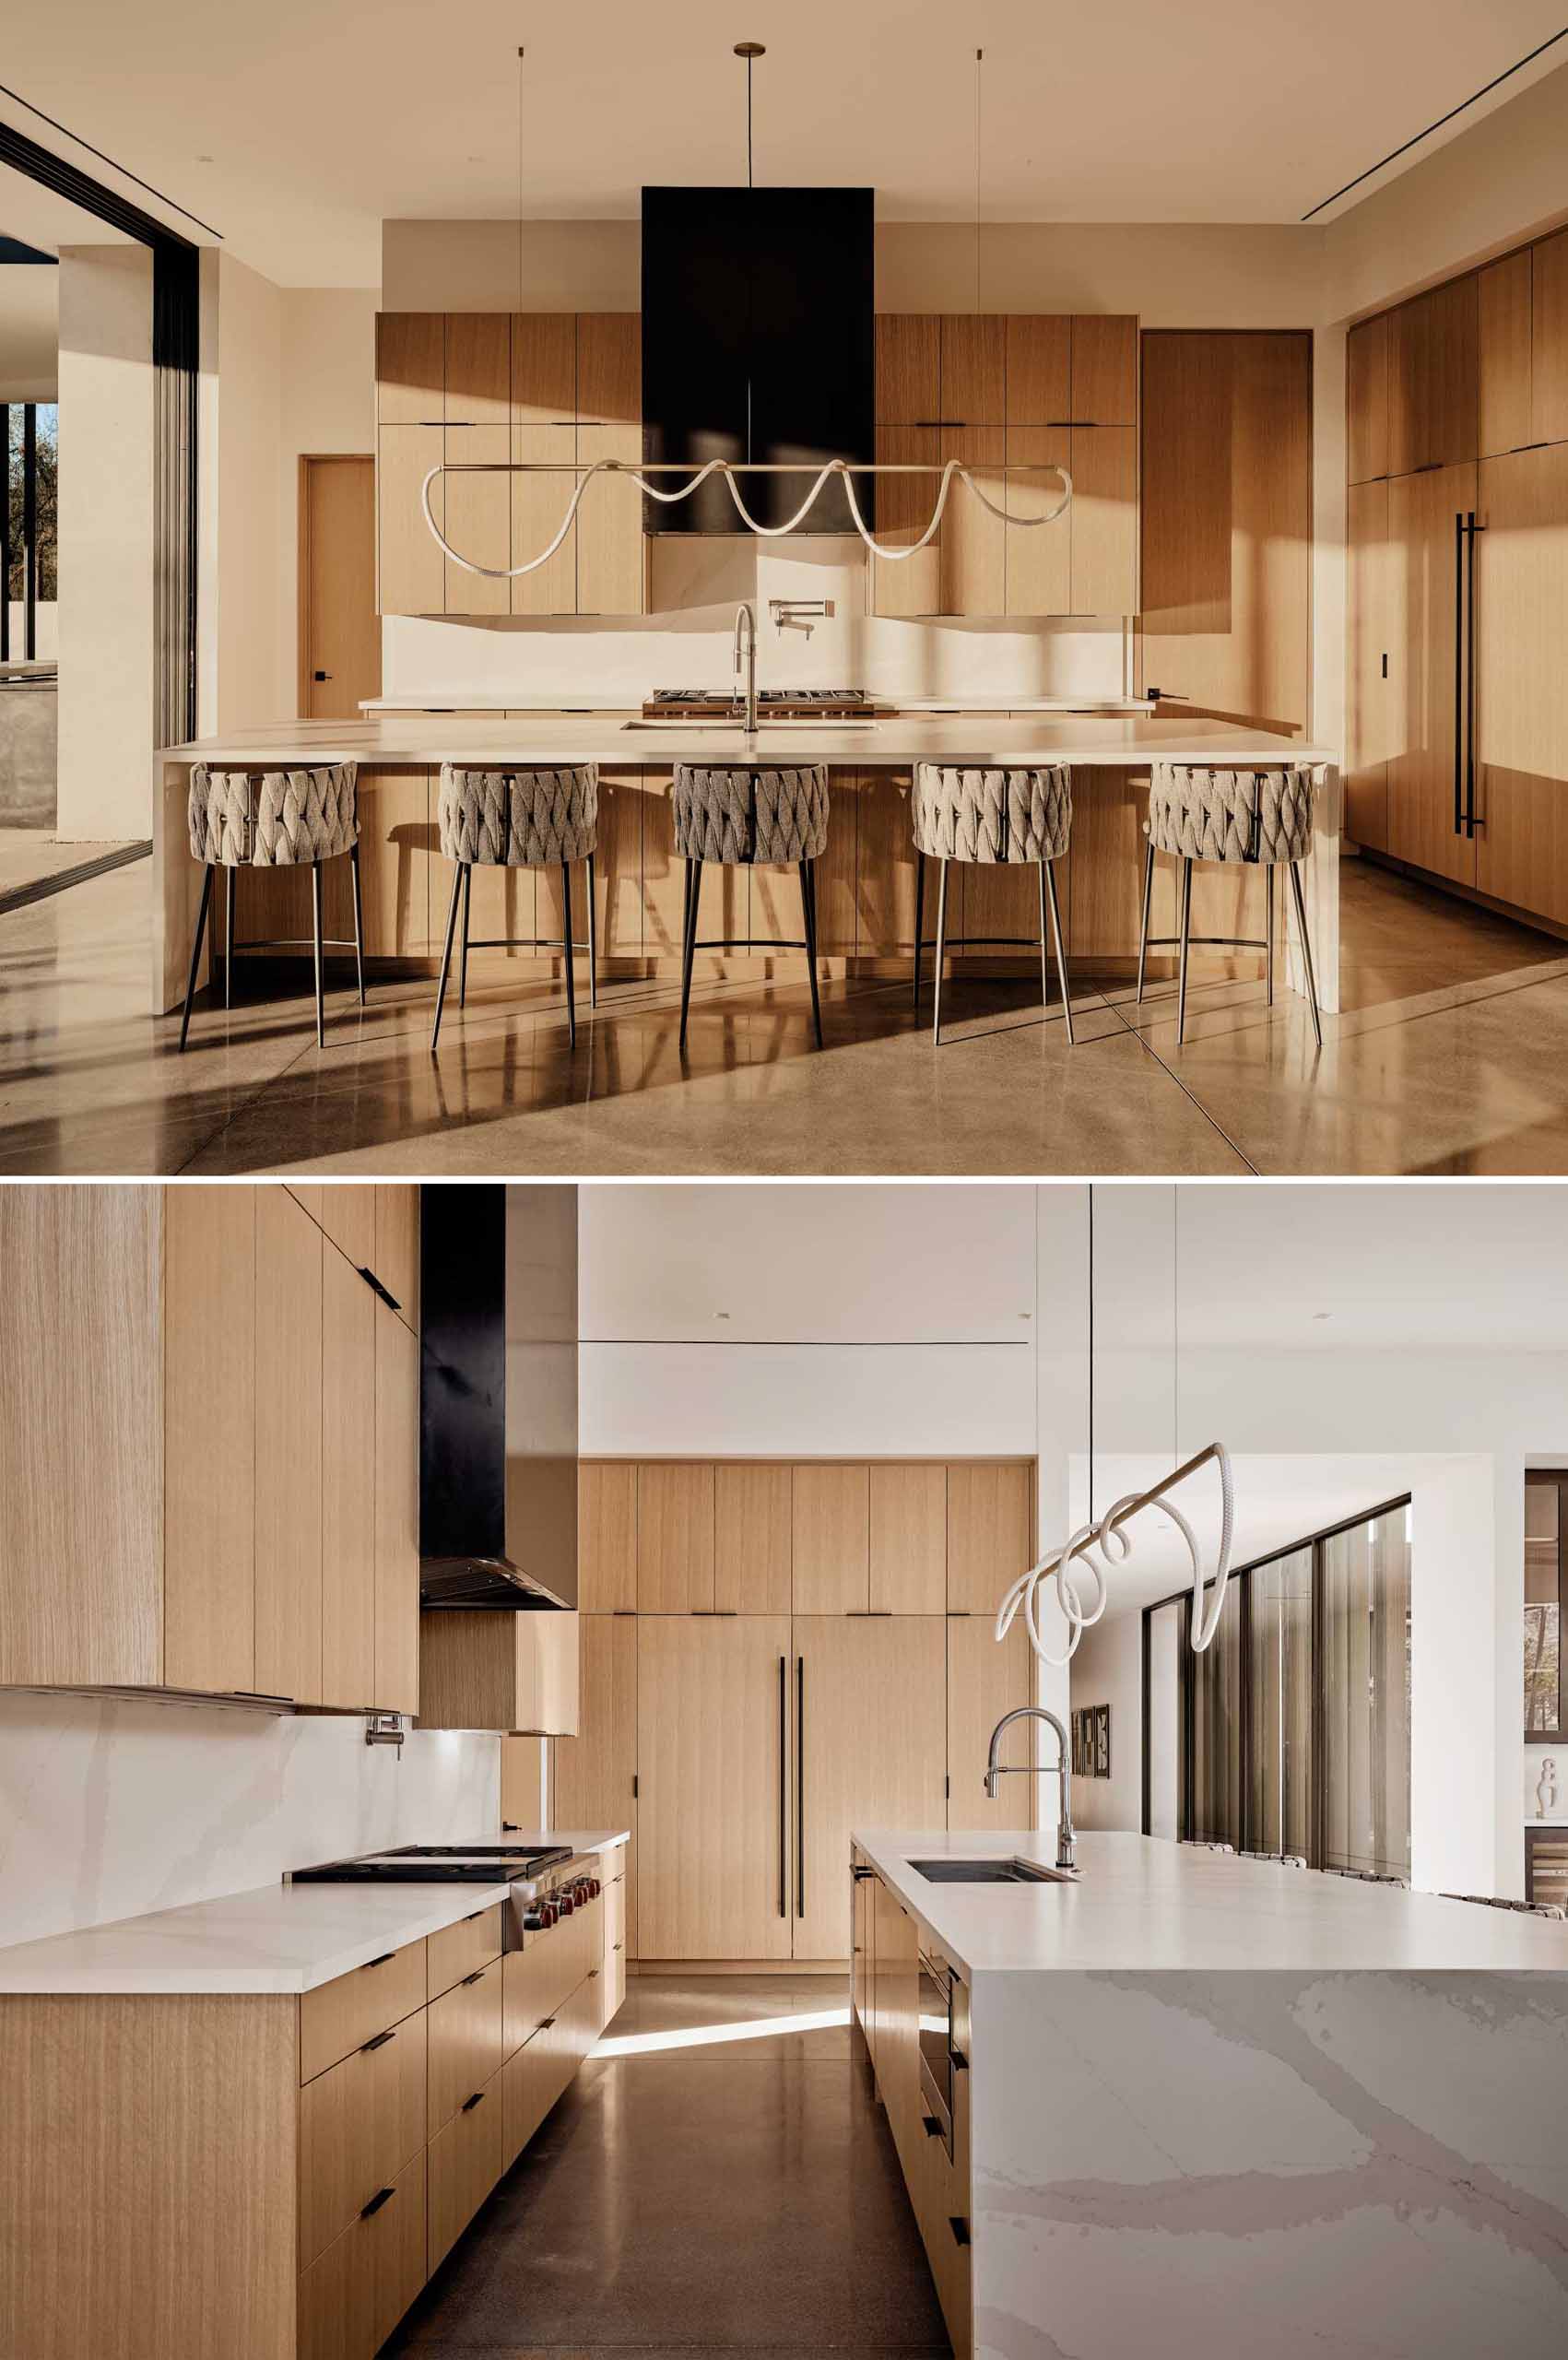 In this kitchen, a sculptural light hangs above the island, while tall wood cabinetry provides plenty of storage.